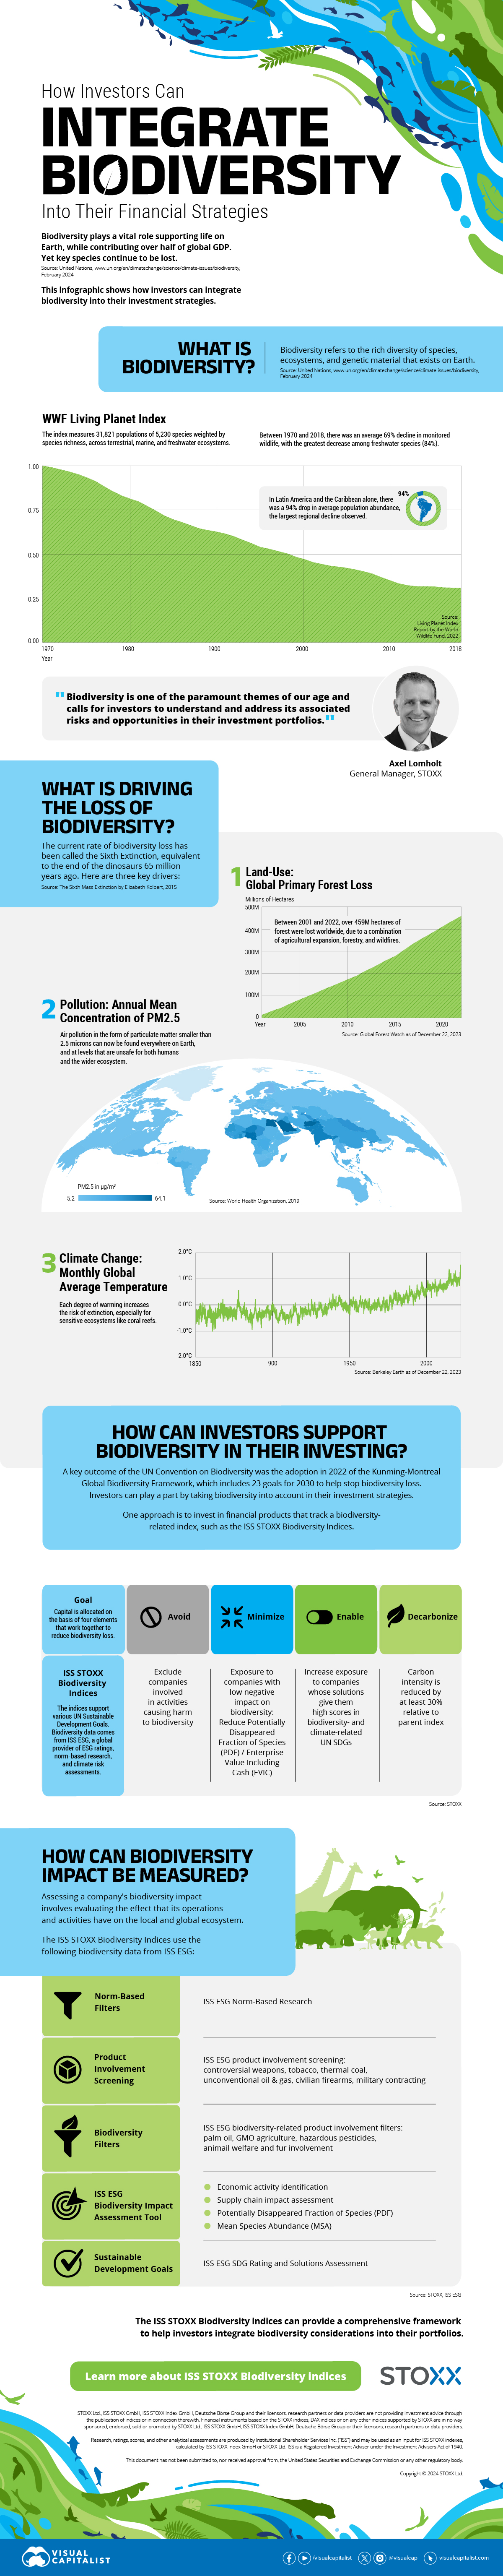 Infographic showing that biodiversity has fallen by 69% on average, according to the WWF Biodiversity Index, driven by climate change, pollution, and land-use changes, and how investors can integrate biodiversity into their investment strategies.